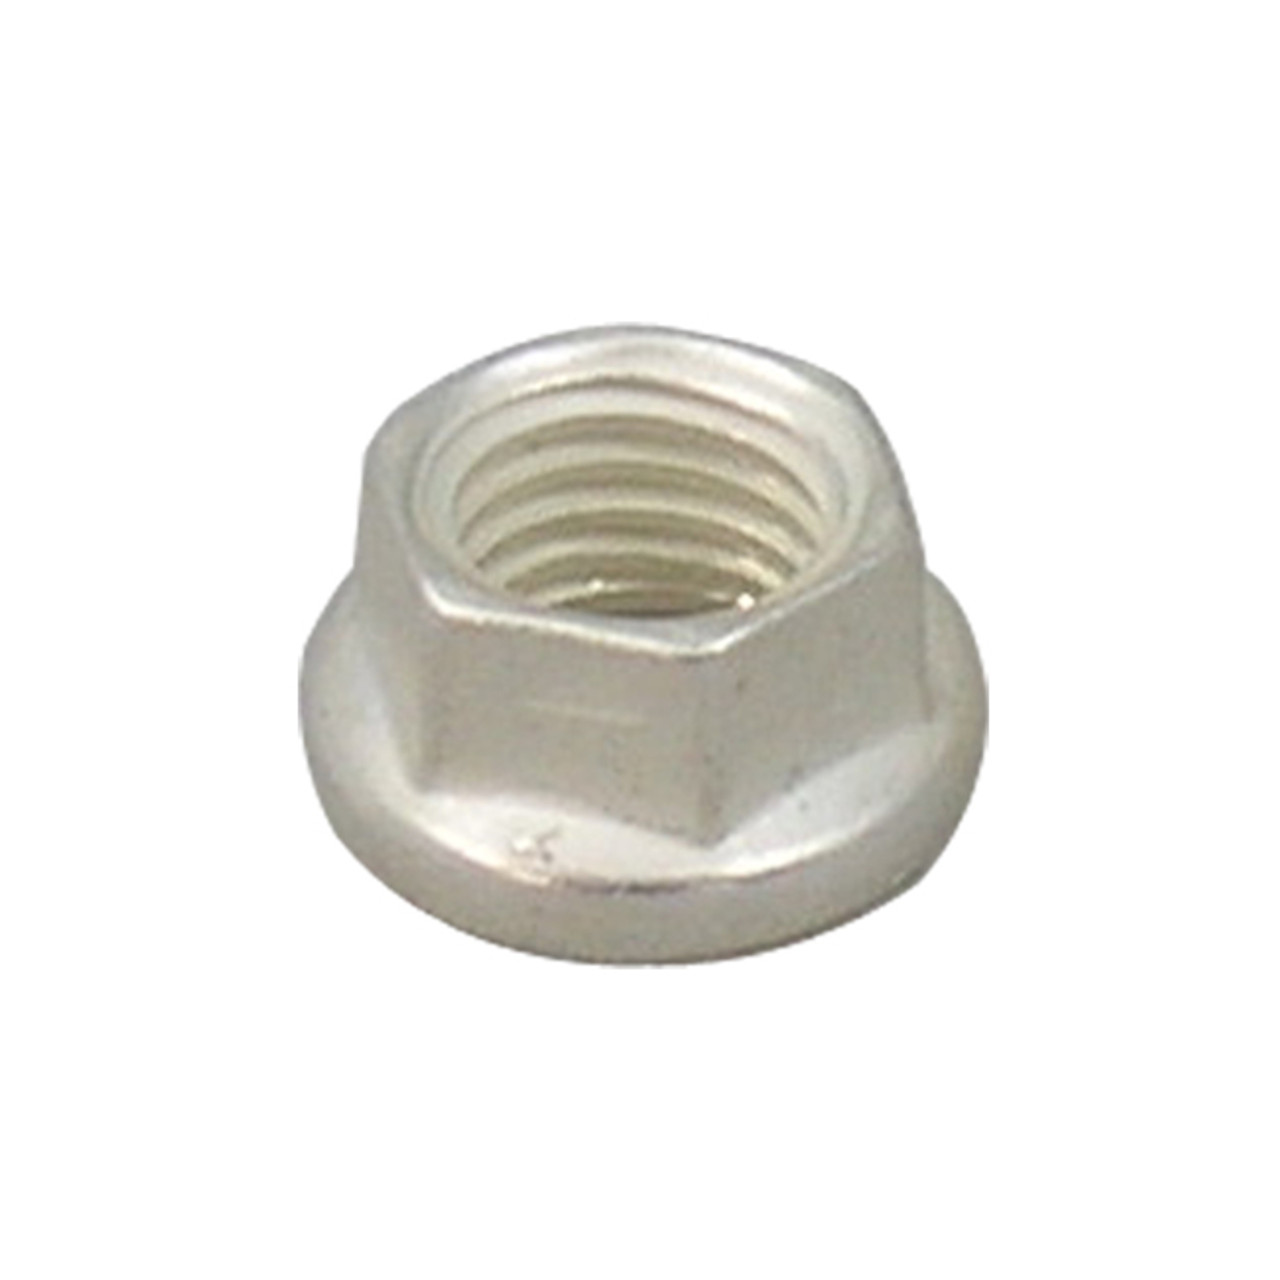 TiAL Sport Clamp Nut for WG Clamp